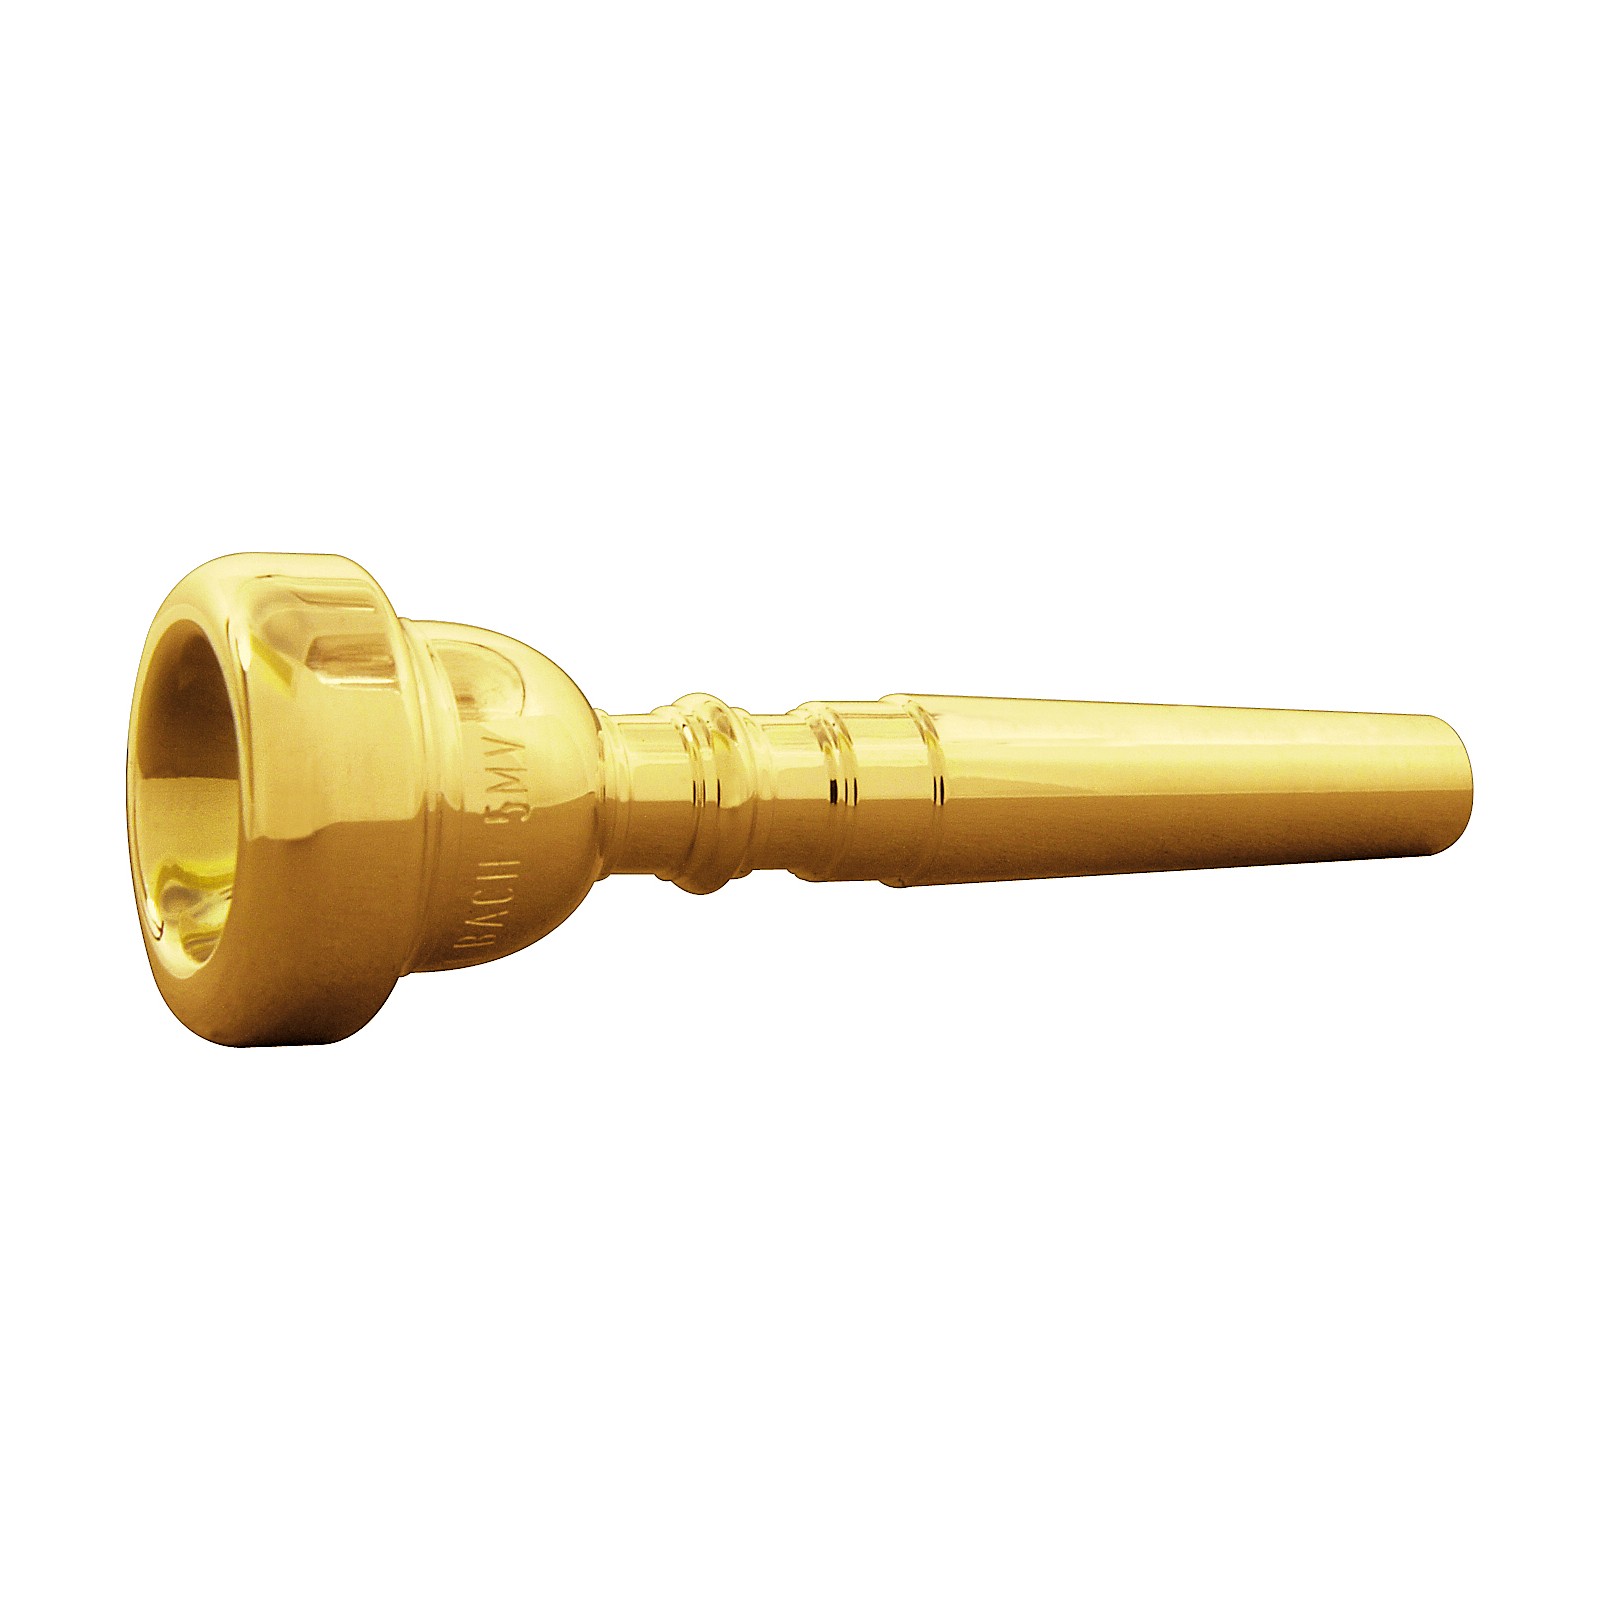 Bach Trumpet Mouthpieces in Gold | Music u0026 Arts